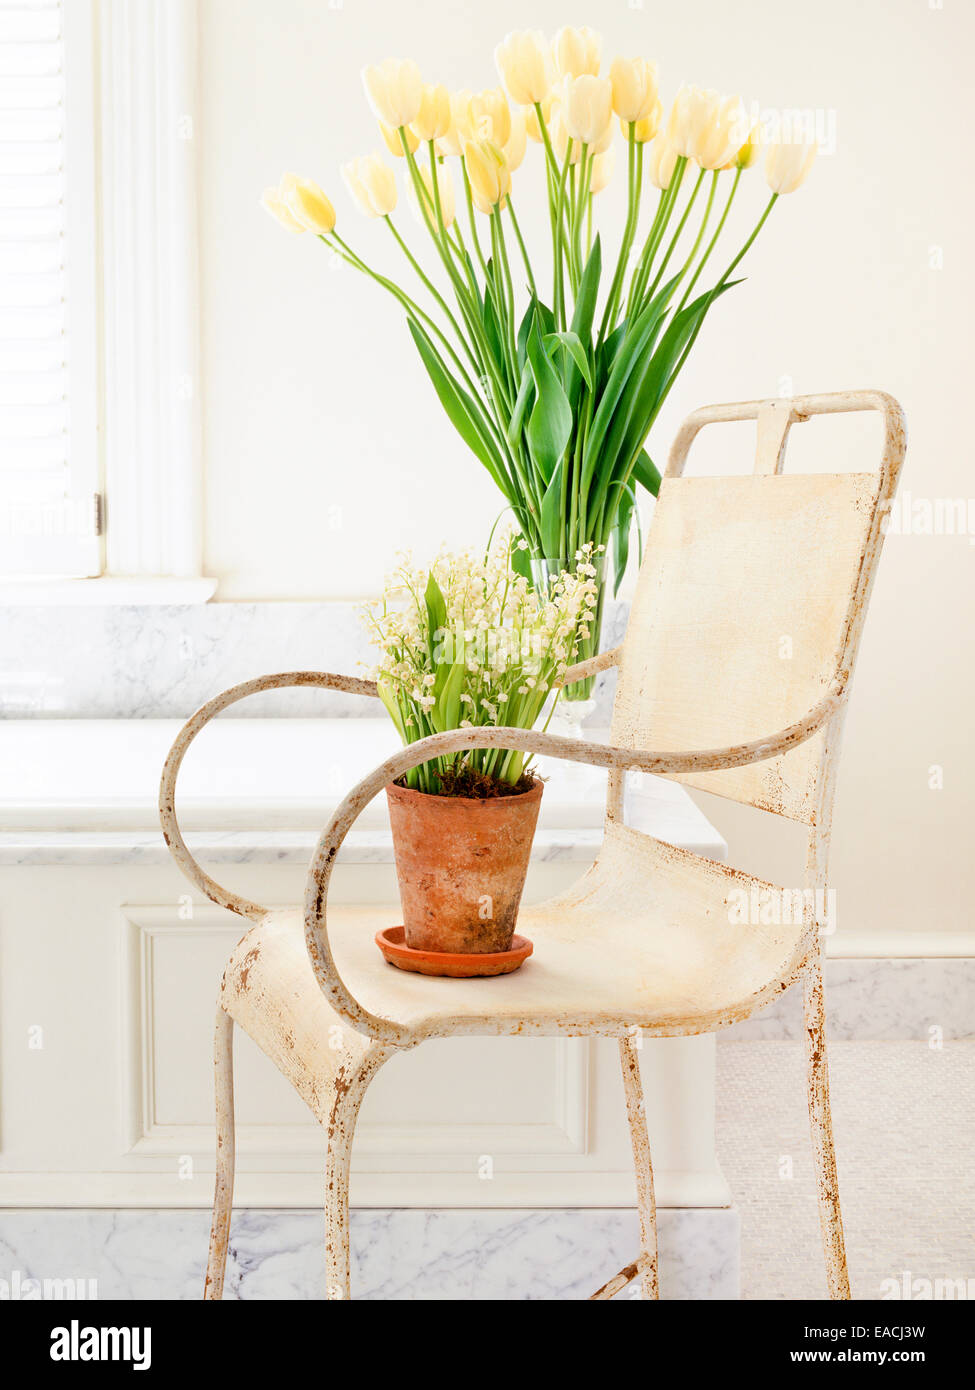 bathroom chair with spring flowers Stock Photo